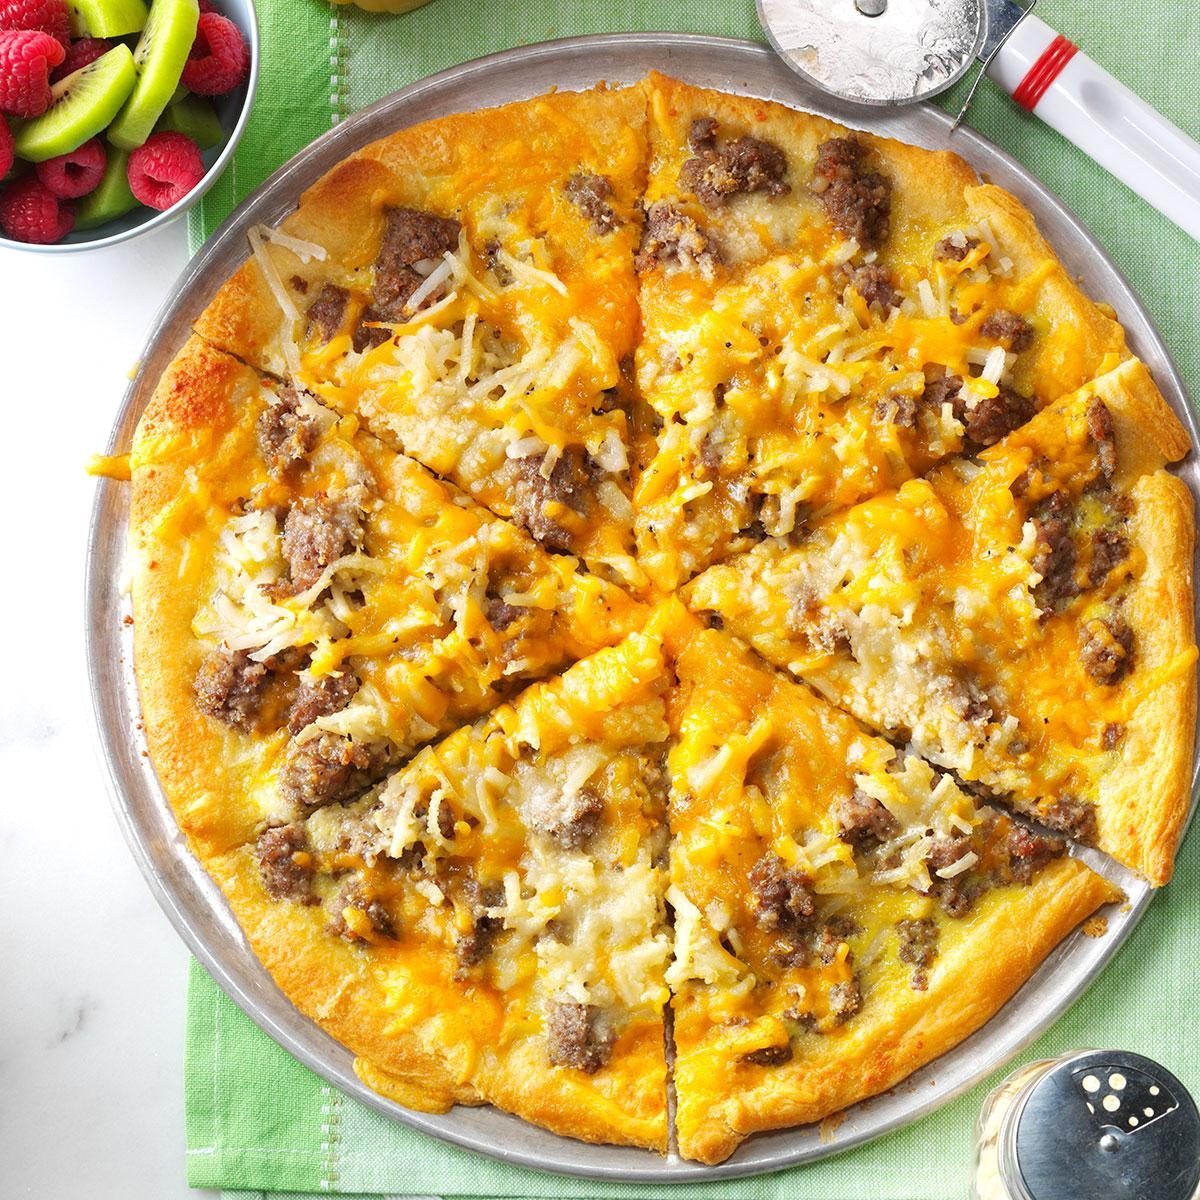 <p>Pizza for breakfast? Kids of all ages will love making—and munching—this hearty meal-in-one made with convenient crescent rolls and frozen hash browns. It's even great for camping! —Rae Truax, Mattawa, Washington</p> <div class="listicle-page__buttons"> <div class="listicle-page__cta-button"><a href='https://www.tasteofhome.com/recipes/sausage-and-hashbrown-breakfast-pizza/'>Go to Recipe</a></div> </div>